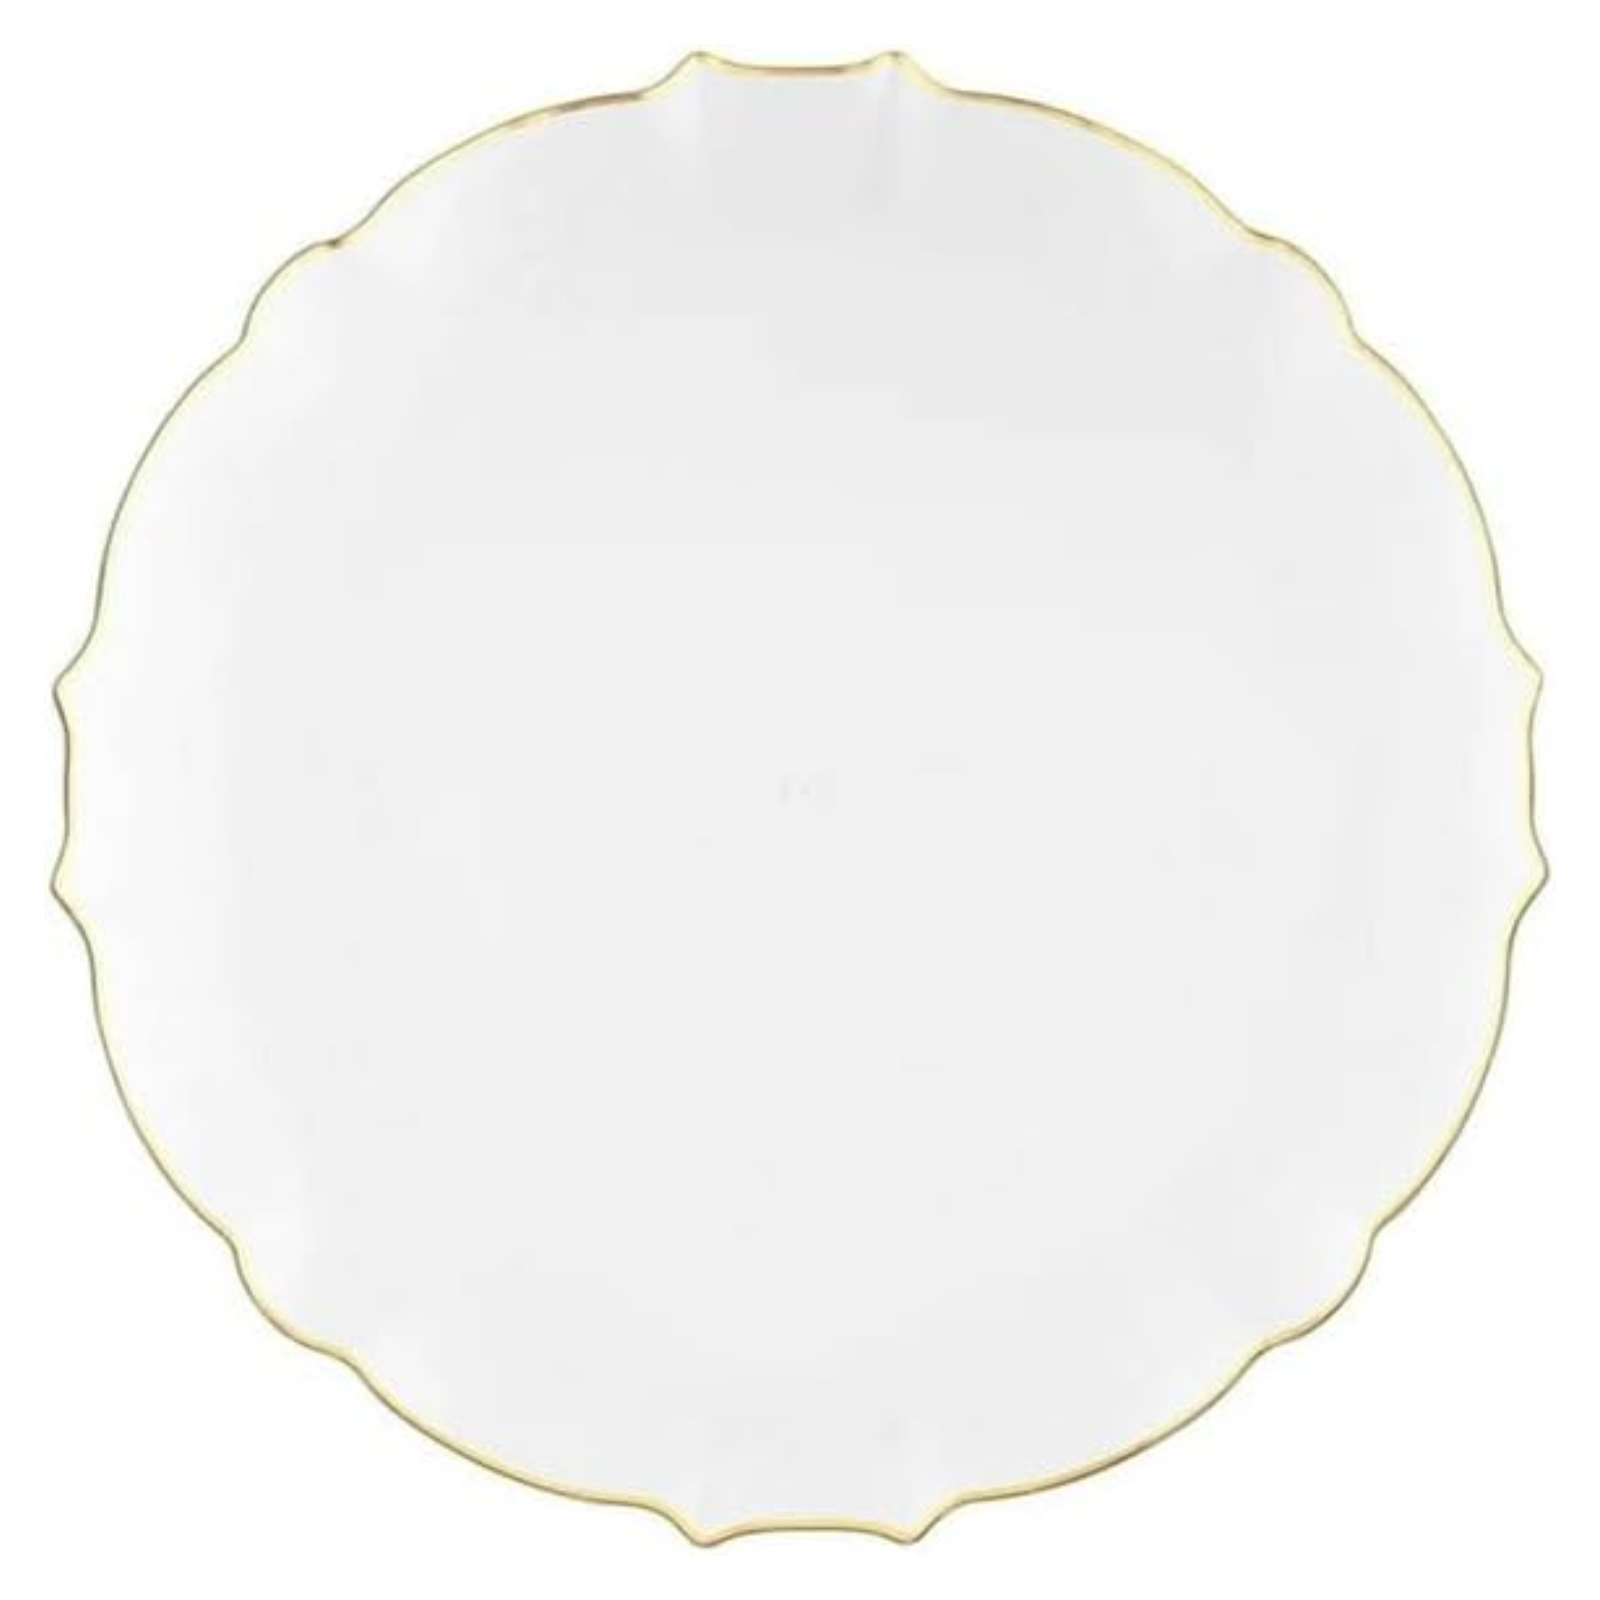 LUXE Collection White With Gold Rim 10.25" Premium Heavyweight Plastic Plates  VeZee   